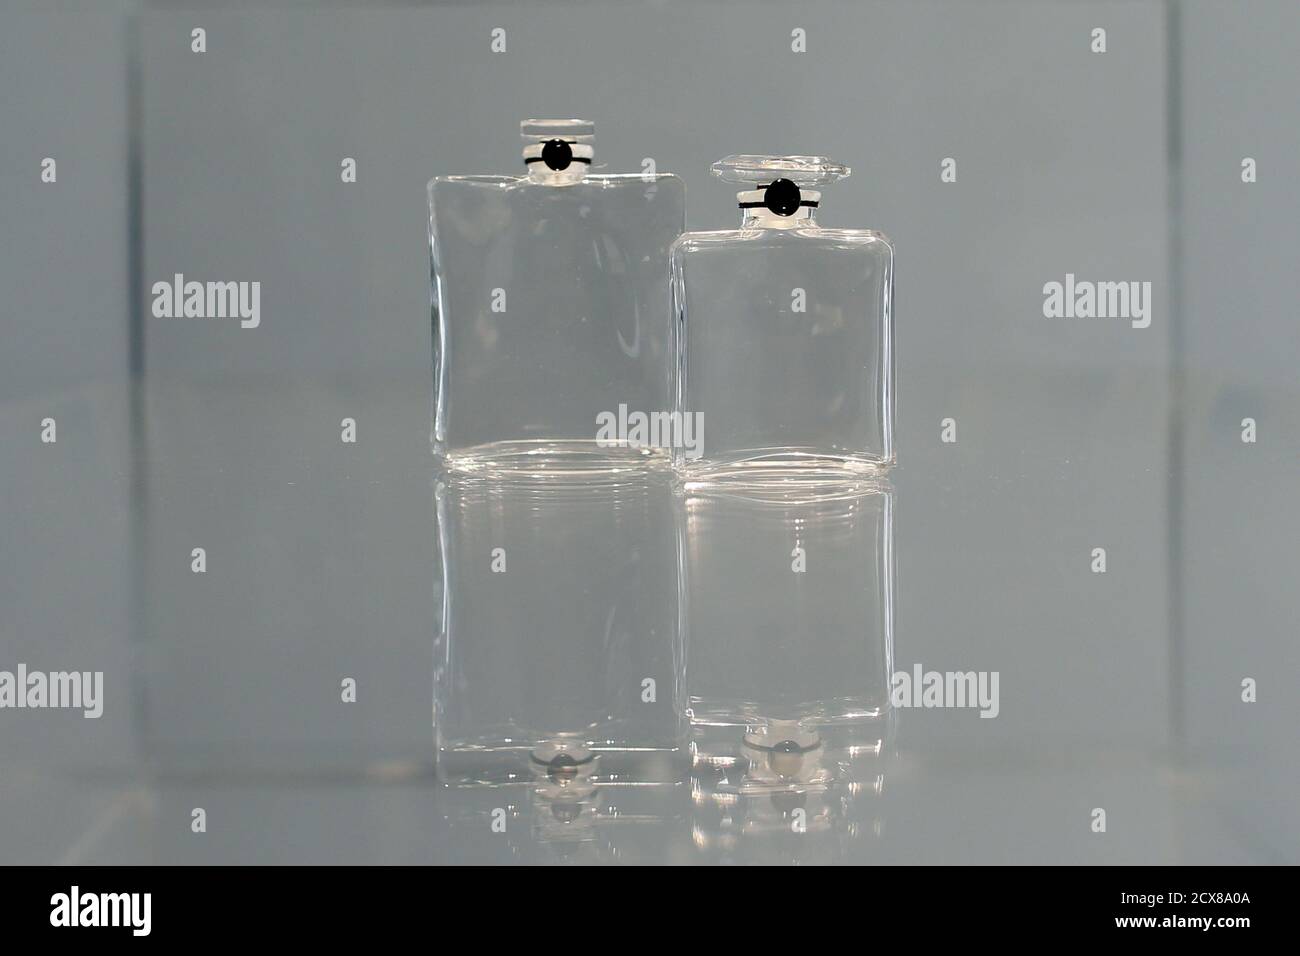 Chanel No 5 Perfume High Resolution Stock Photography And Images Alamy